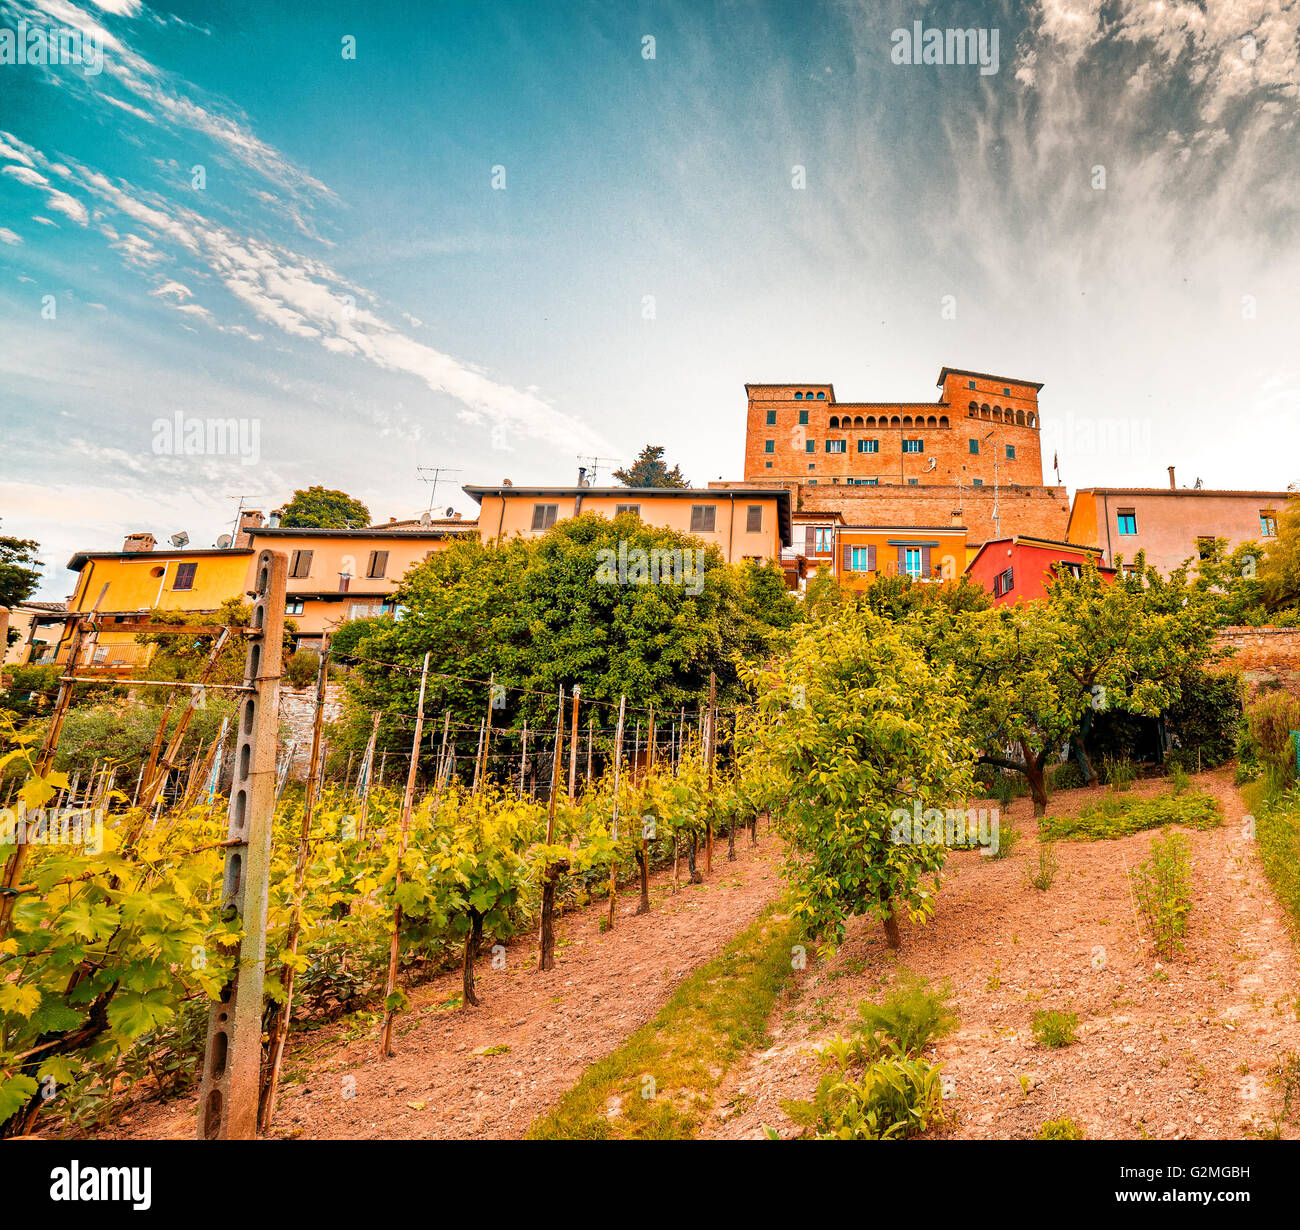 cultivated fields, orchards and vineyards under 1200 AD Malatestian castle of Longiano, in Italy Stock Photo